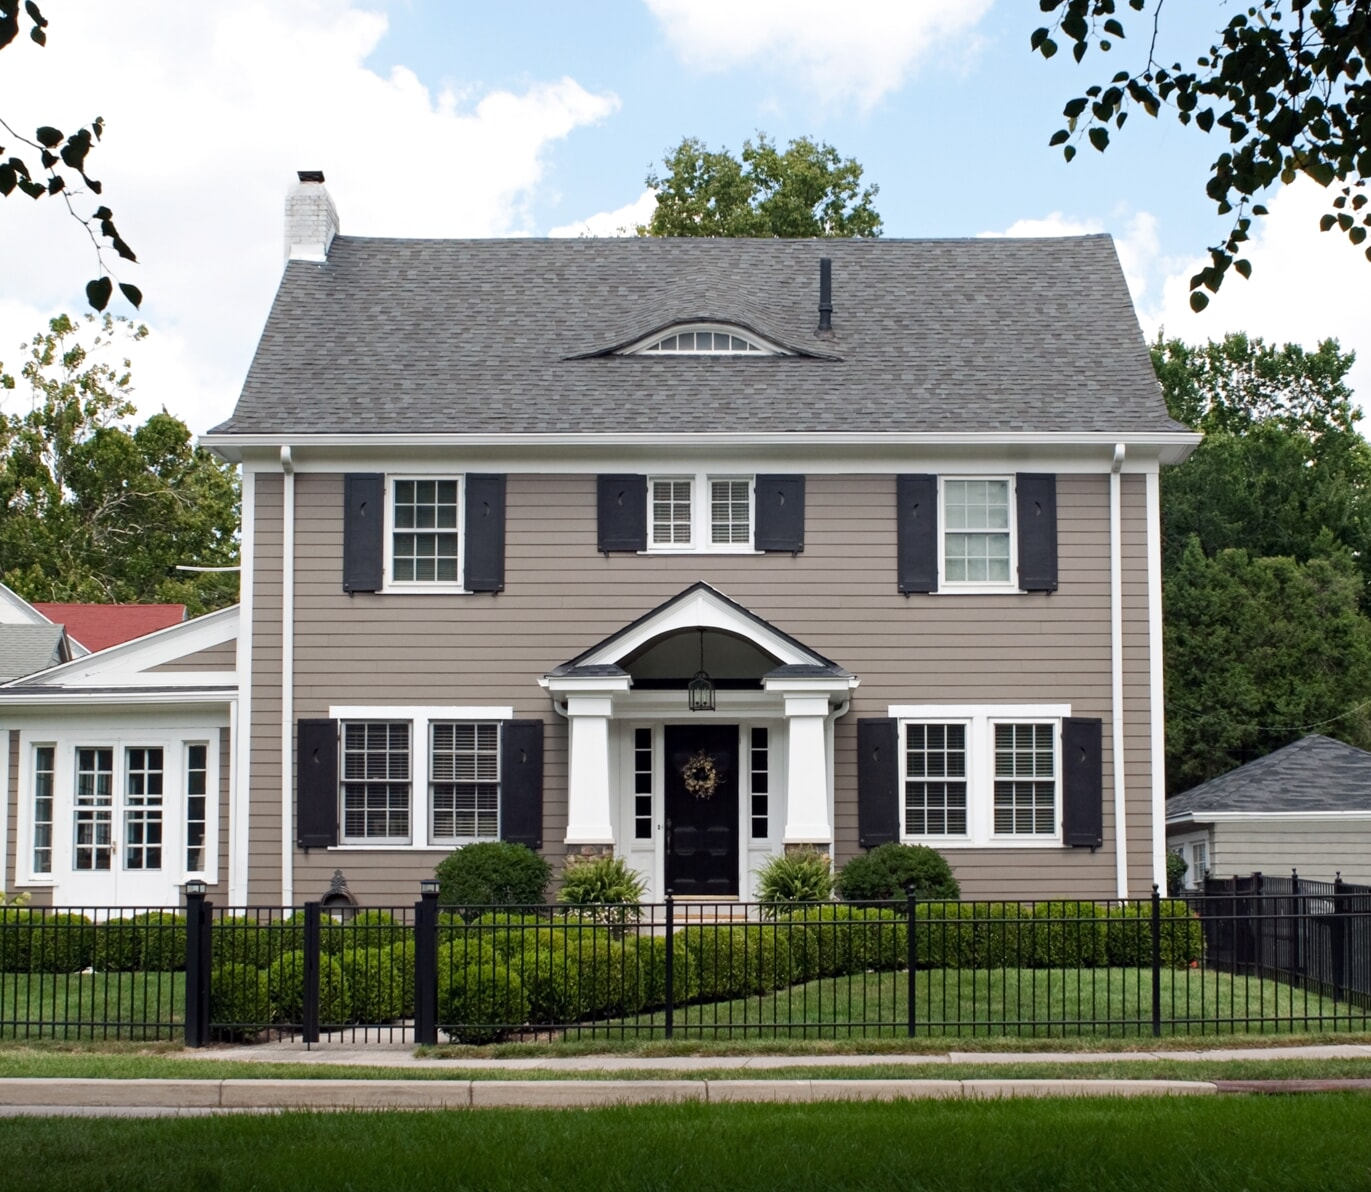 Two-story colonial home painted brown and white with grey shutters